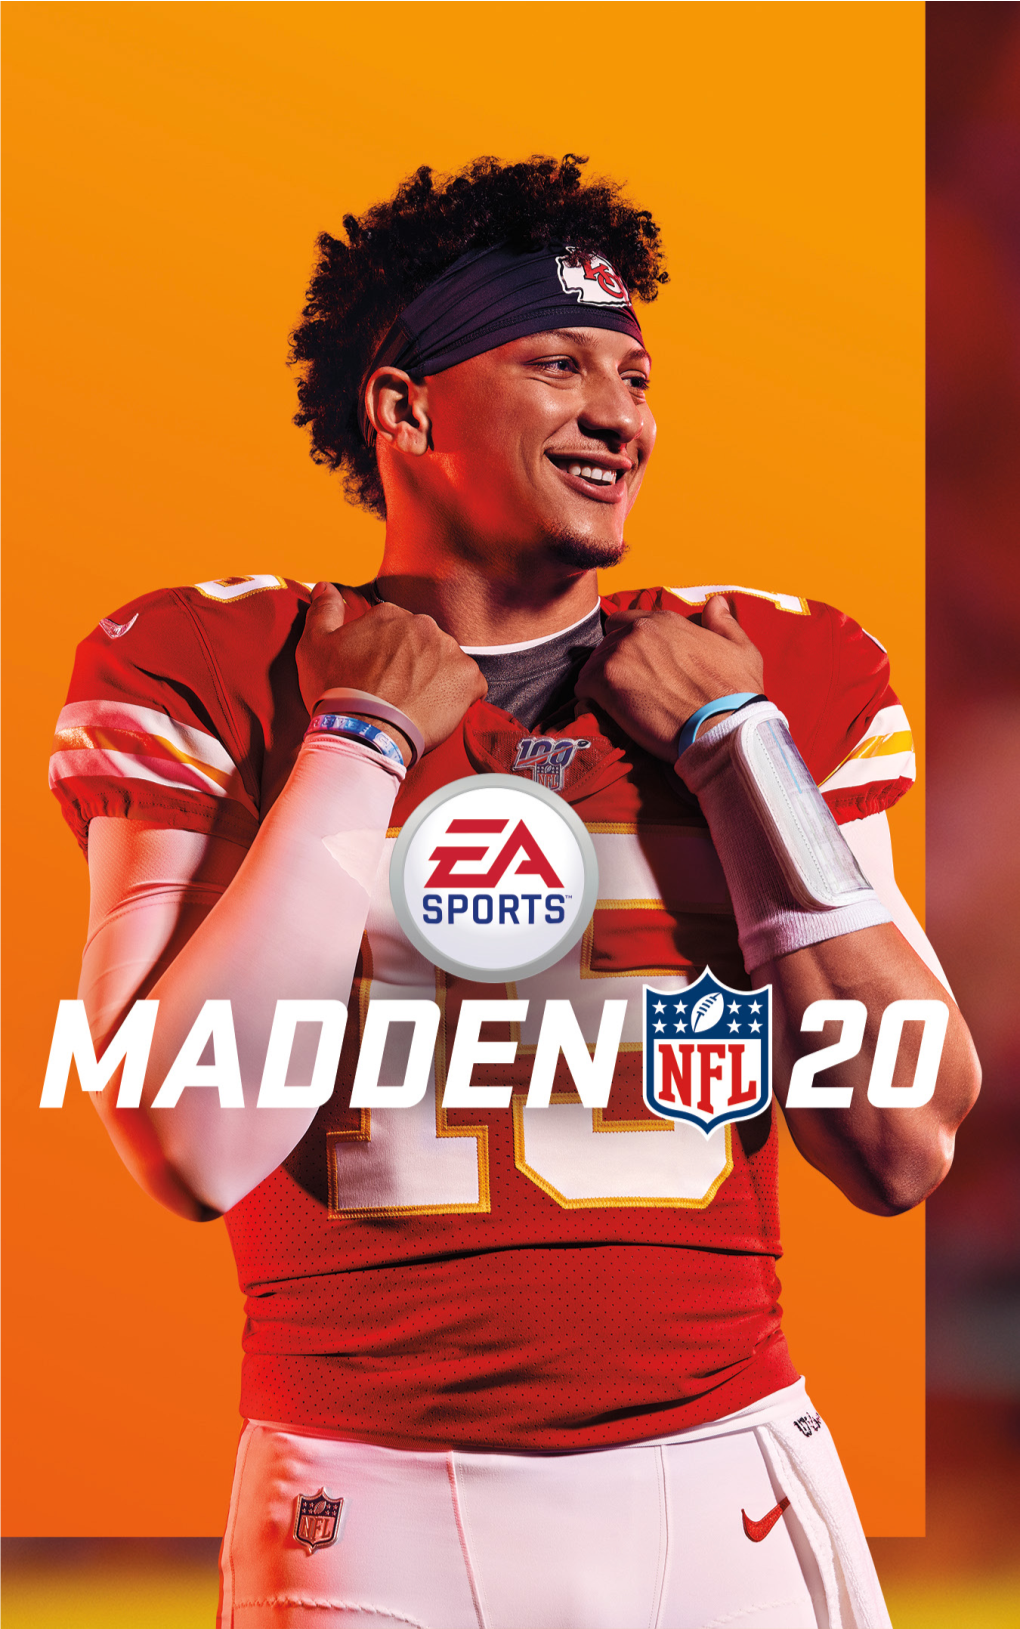 Madden NFL 20 on PC Fully Supports the Xbox One Wireless Controller and Offers a New Control Scheme for the Keyboard and Mouse